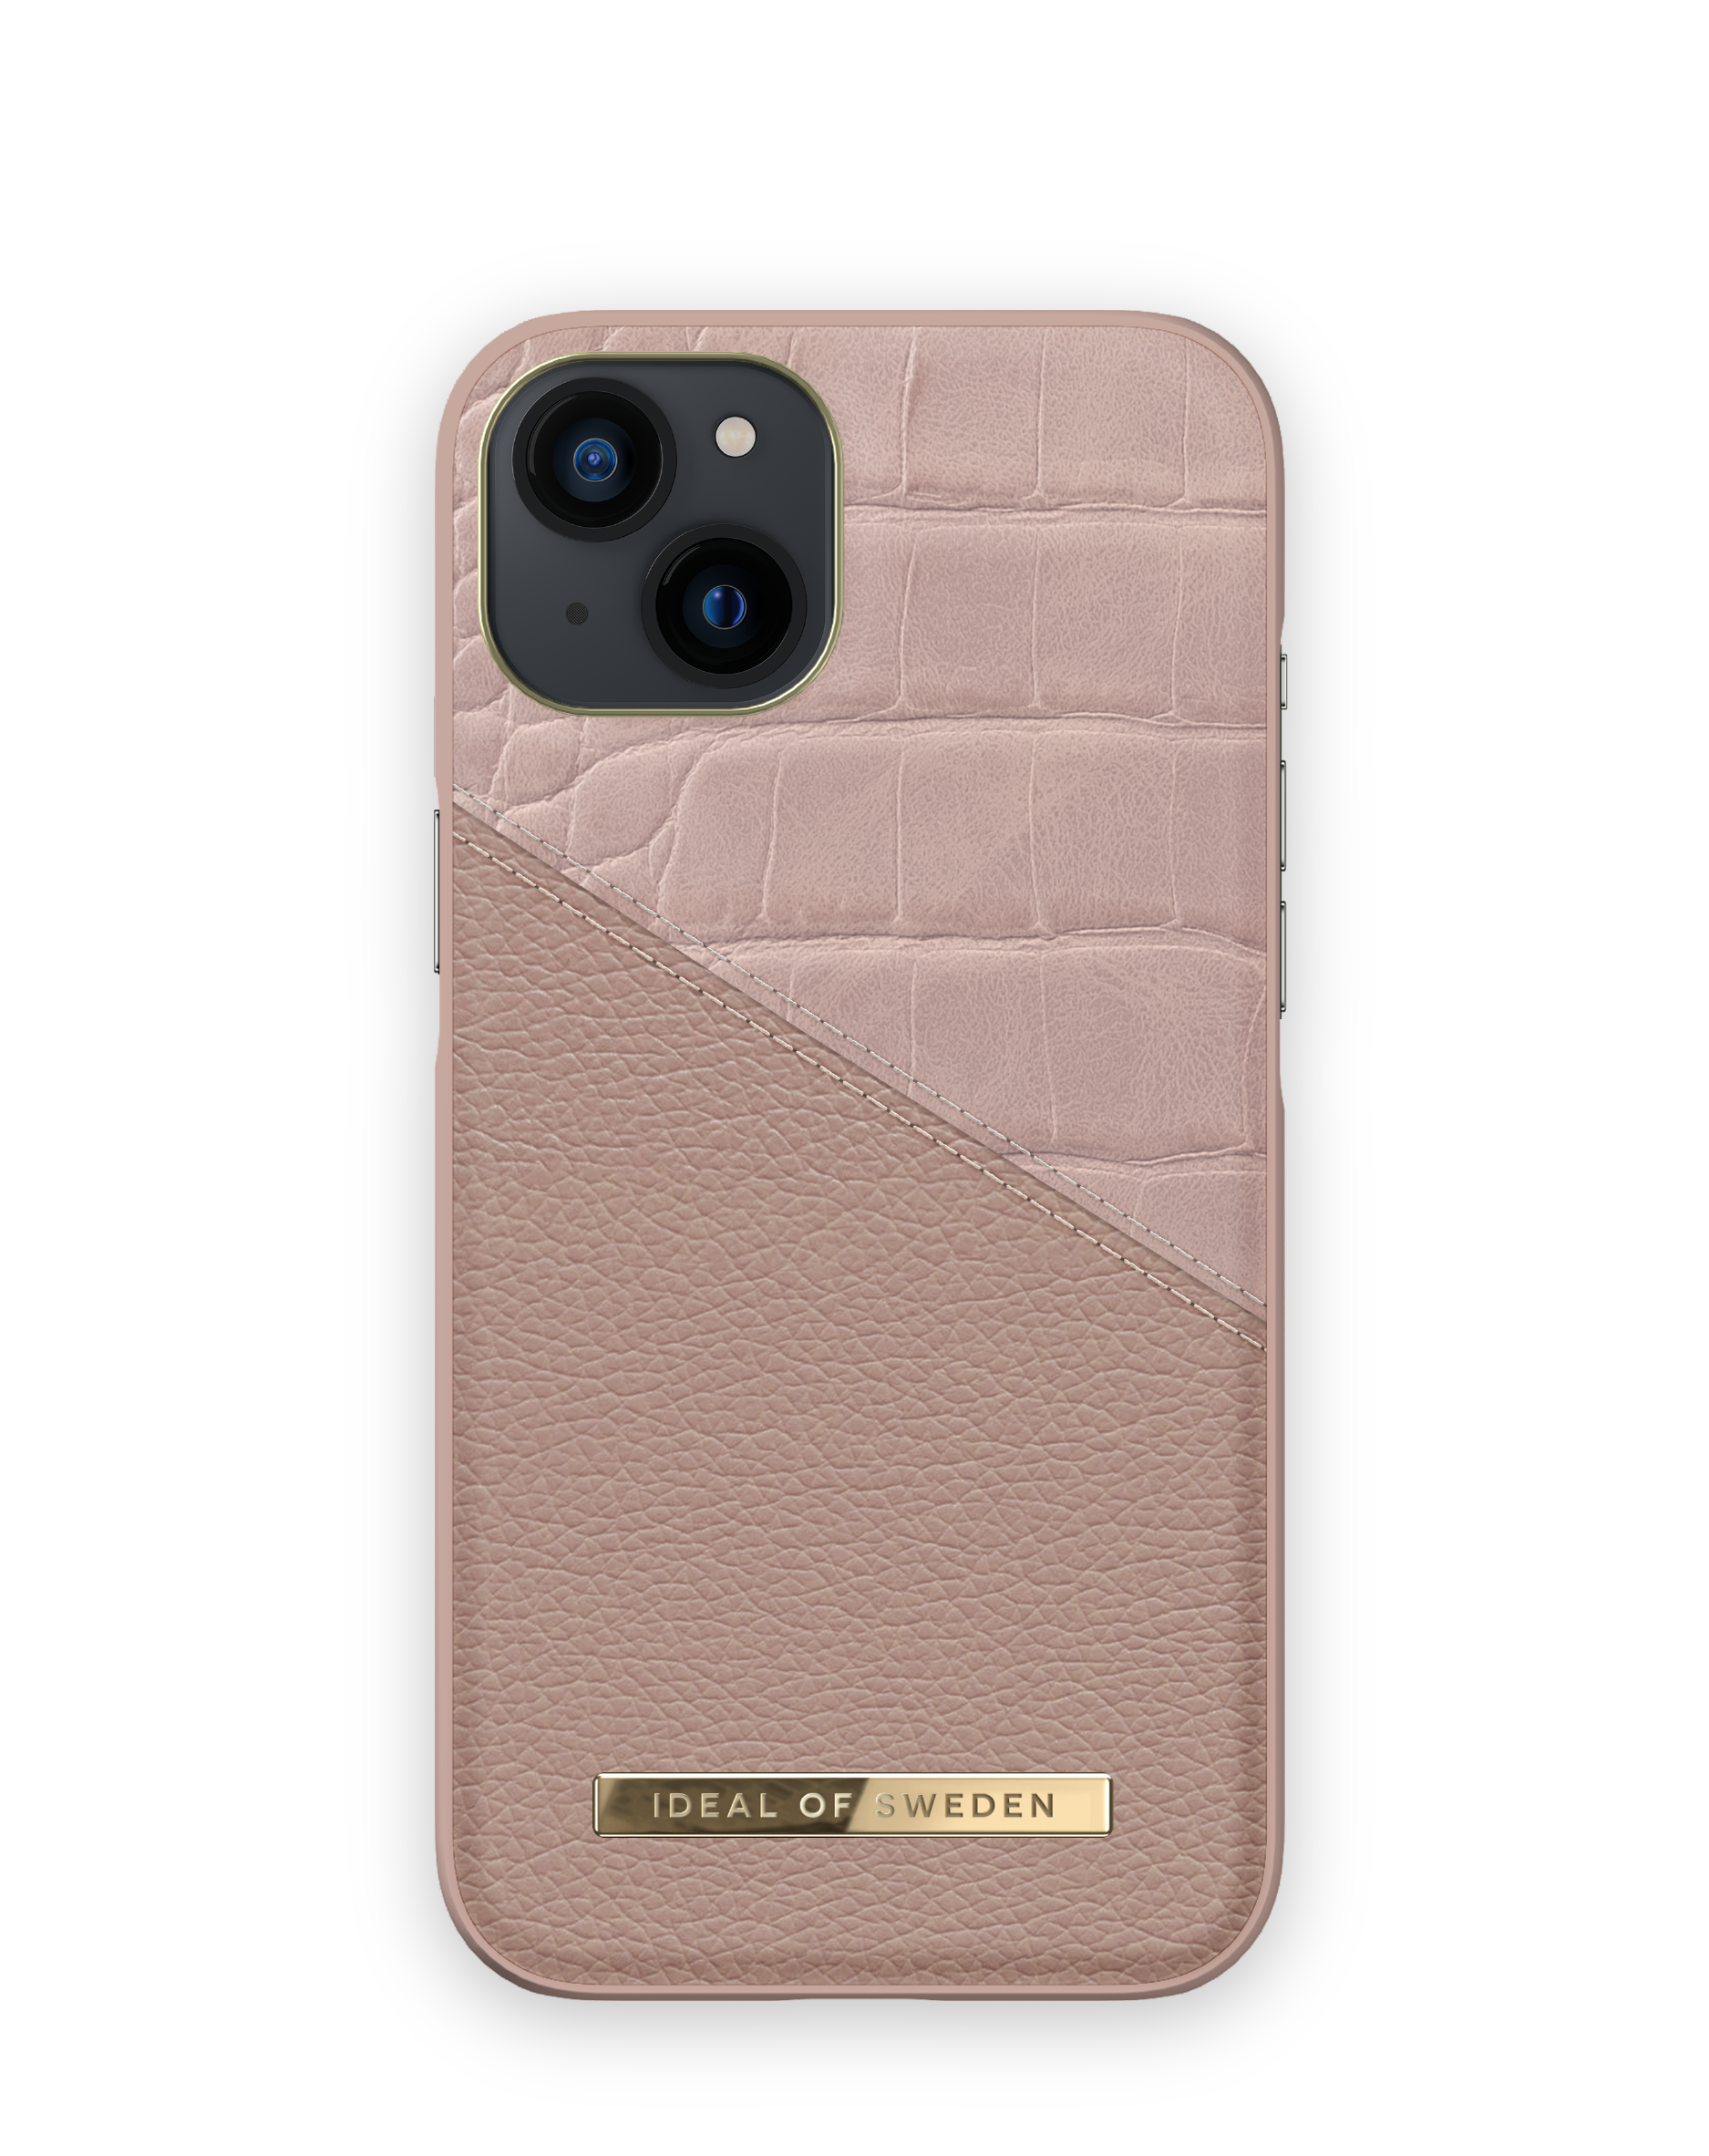 Apple, Croco SWEDEN OF IDACSS20-I2161-202, 13, Rose Smoke iPhone IDEAL Backcover,